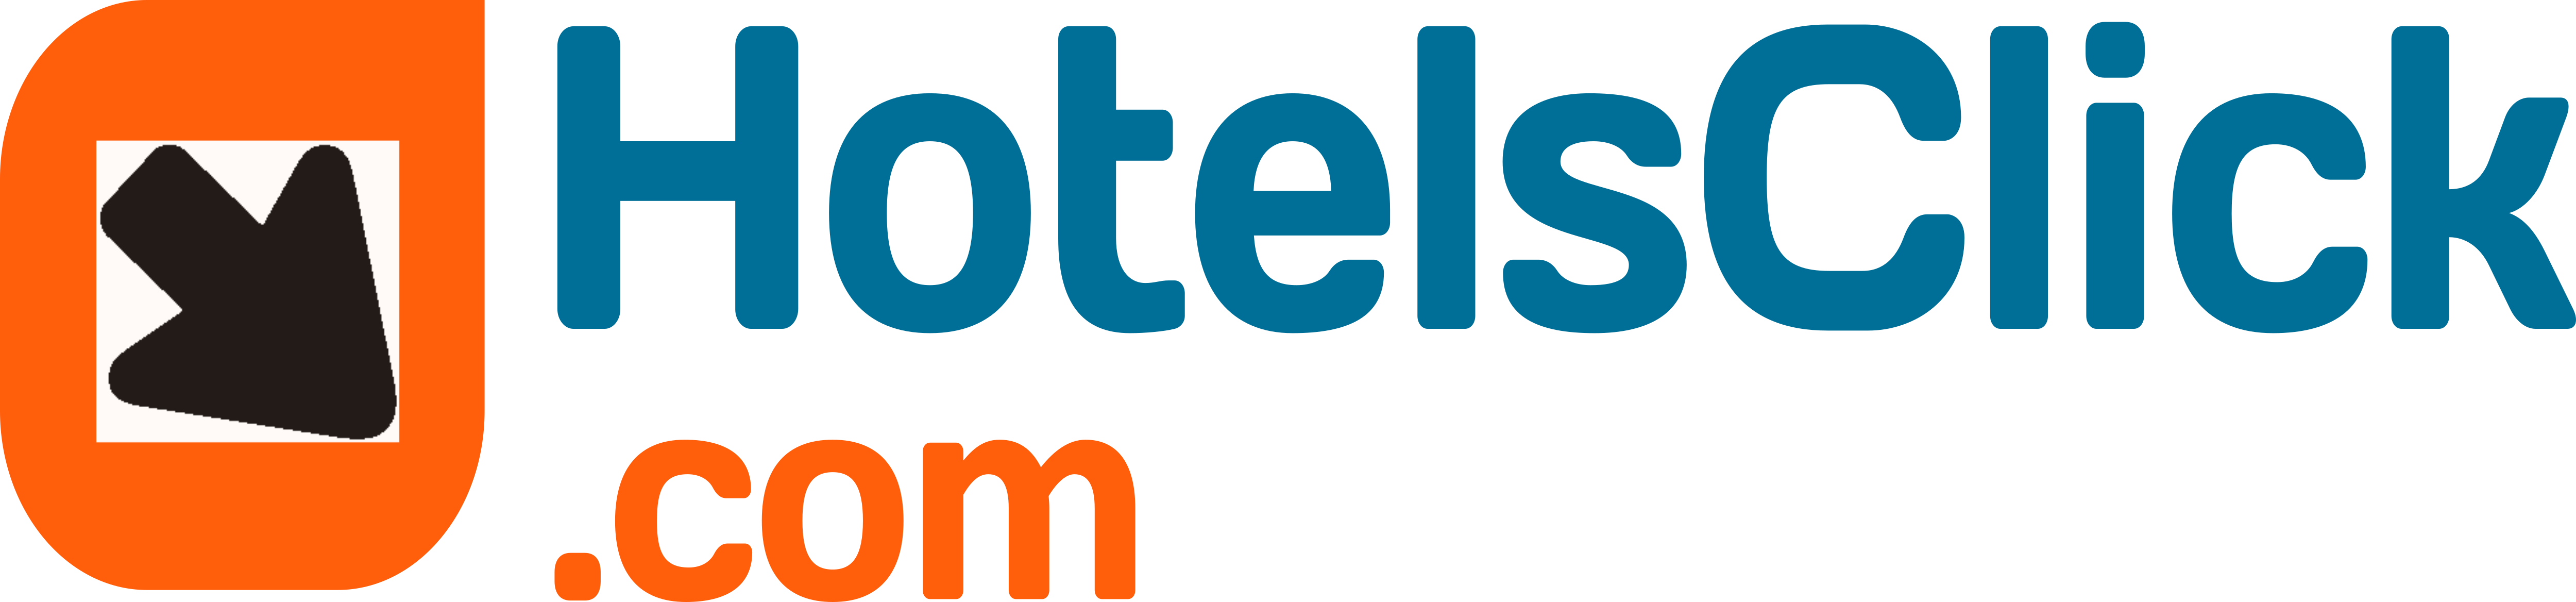 Hotelsclick Coupons & Promo Codes